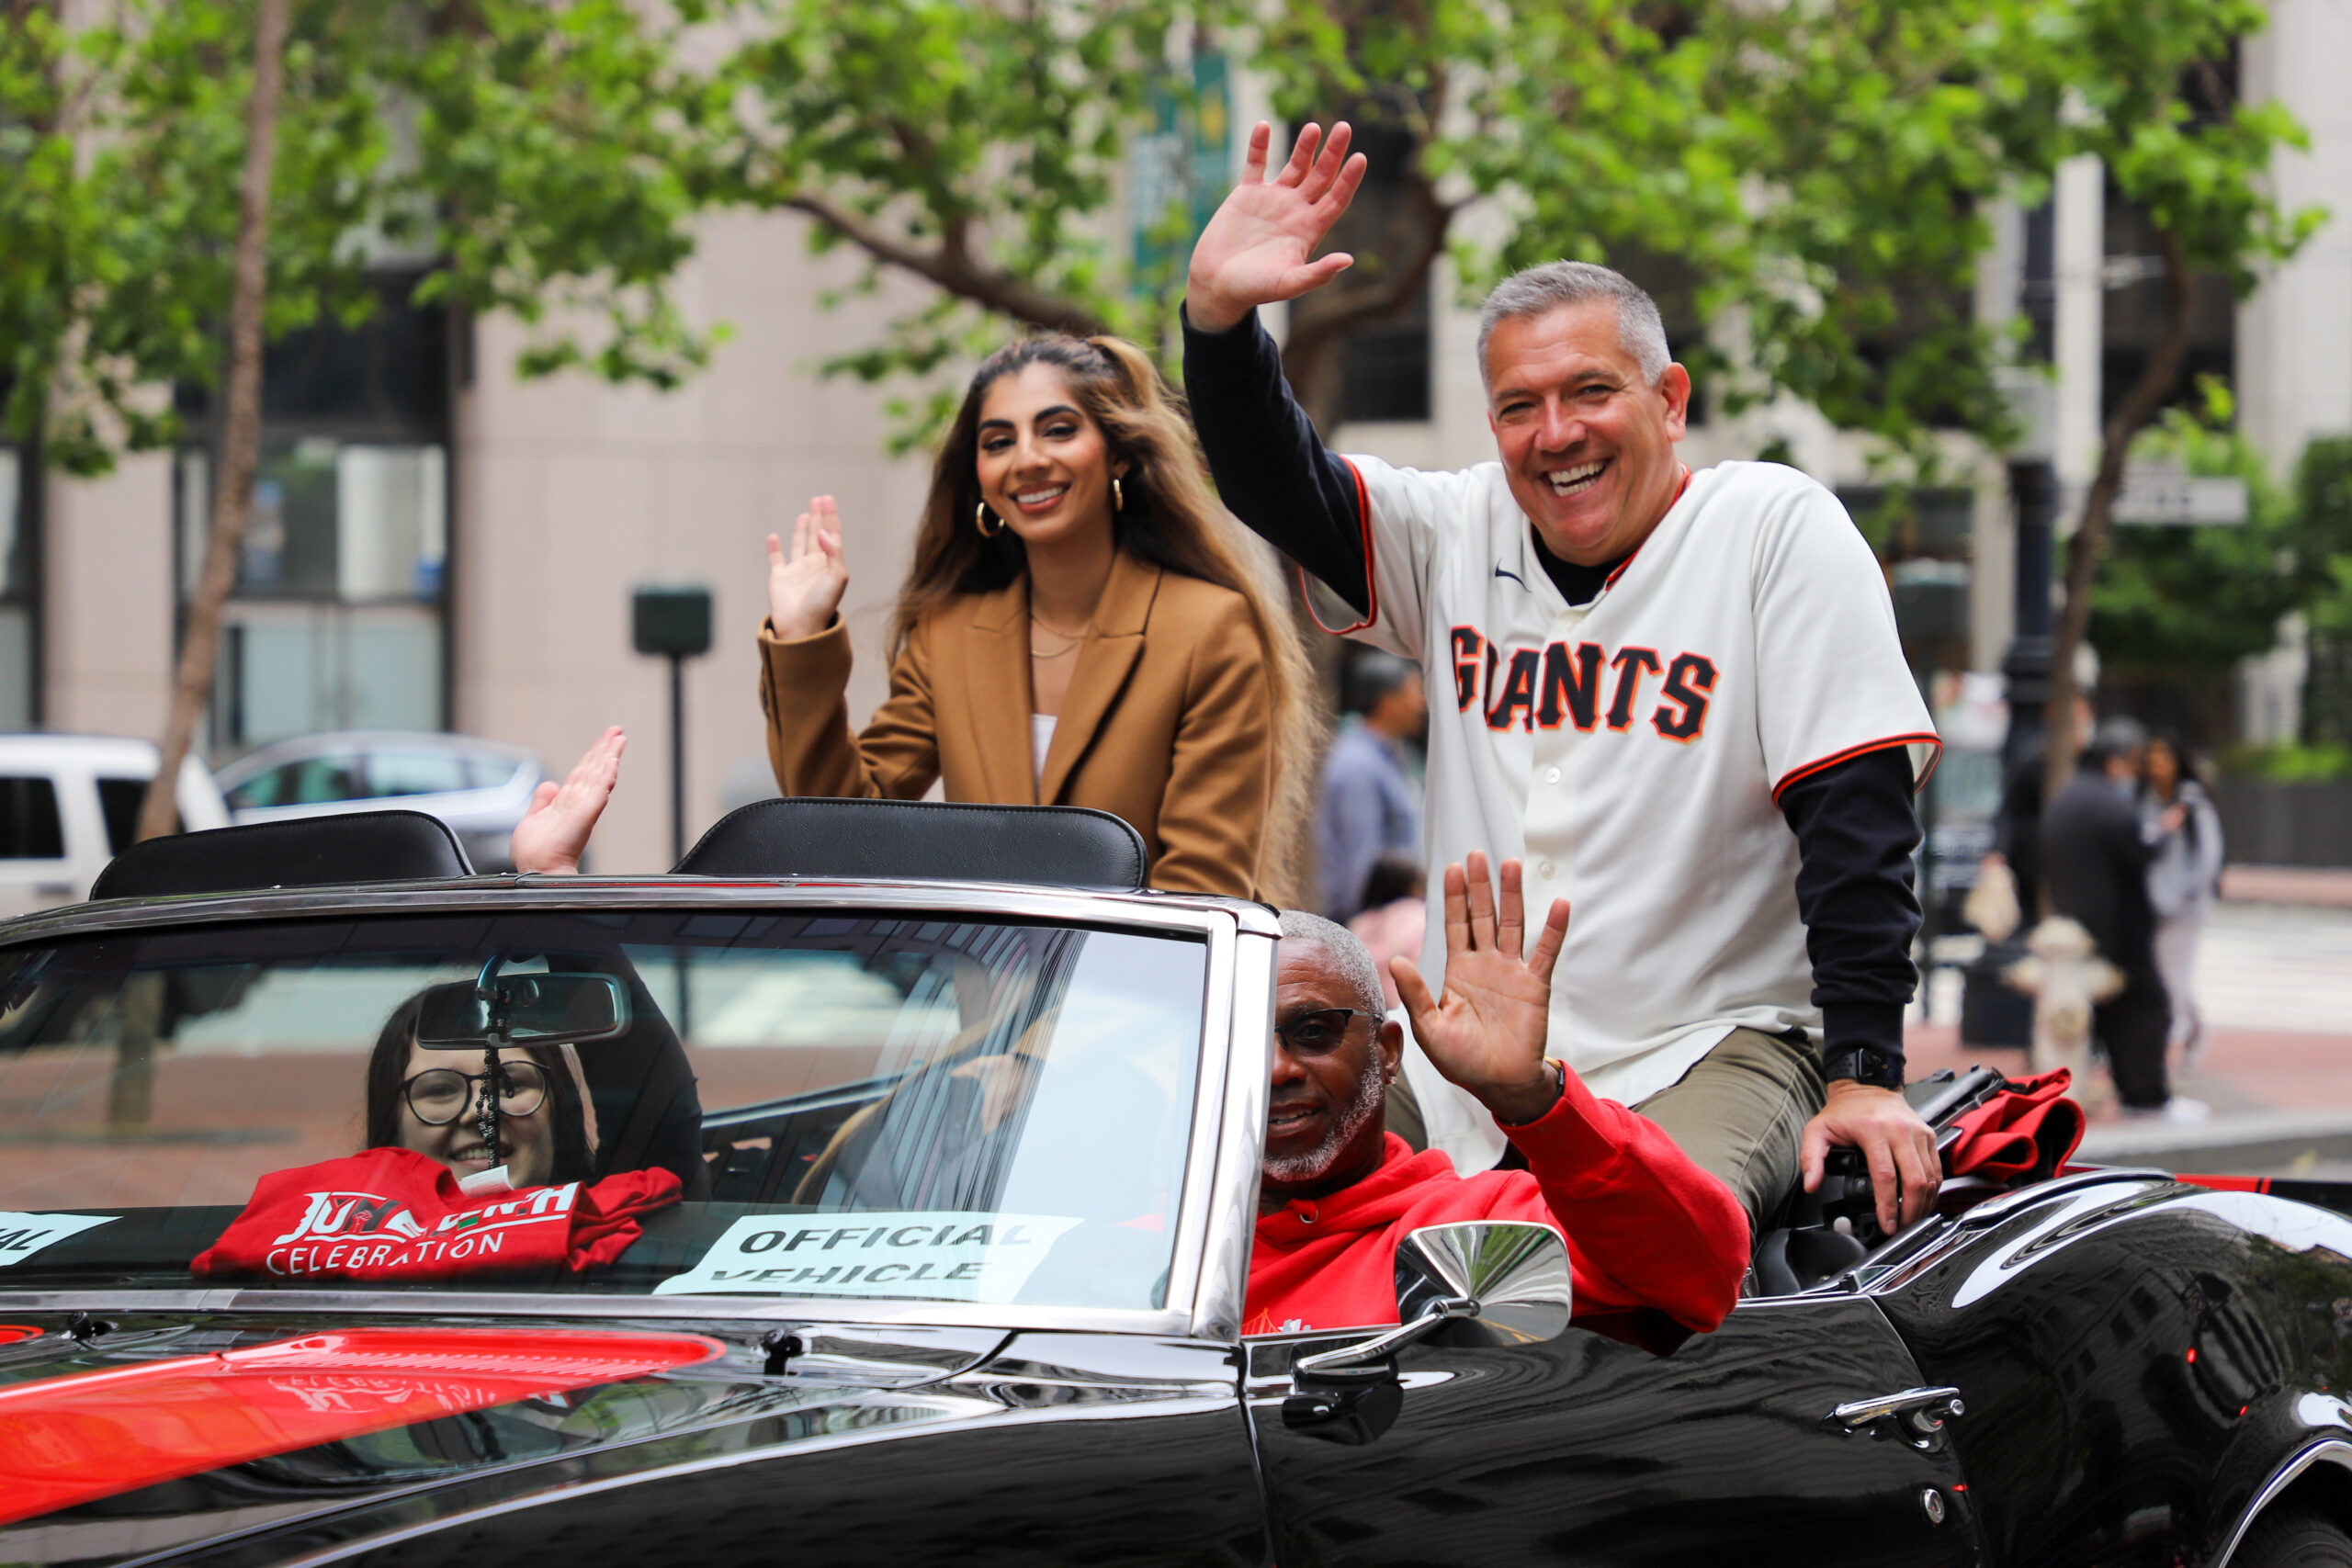 Three people are joyfully waving from a convertible vehicle, with one wearing a Giants jersey.